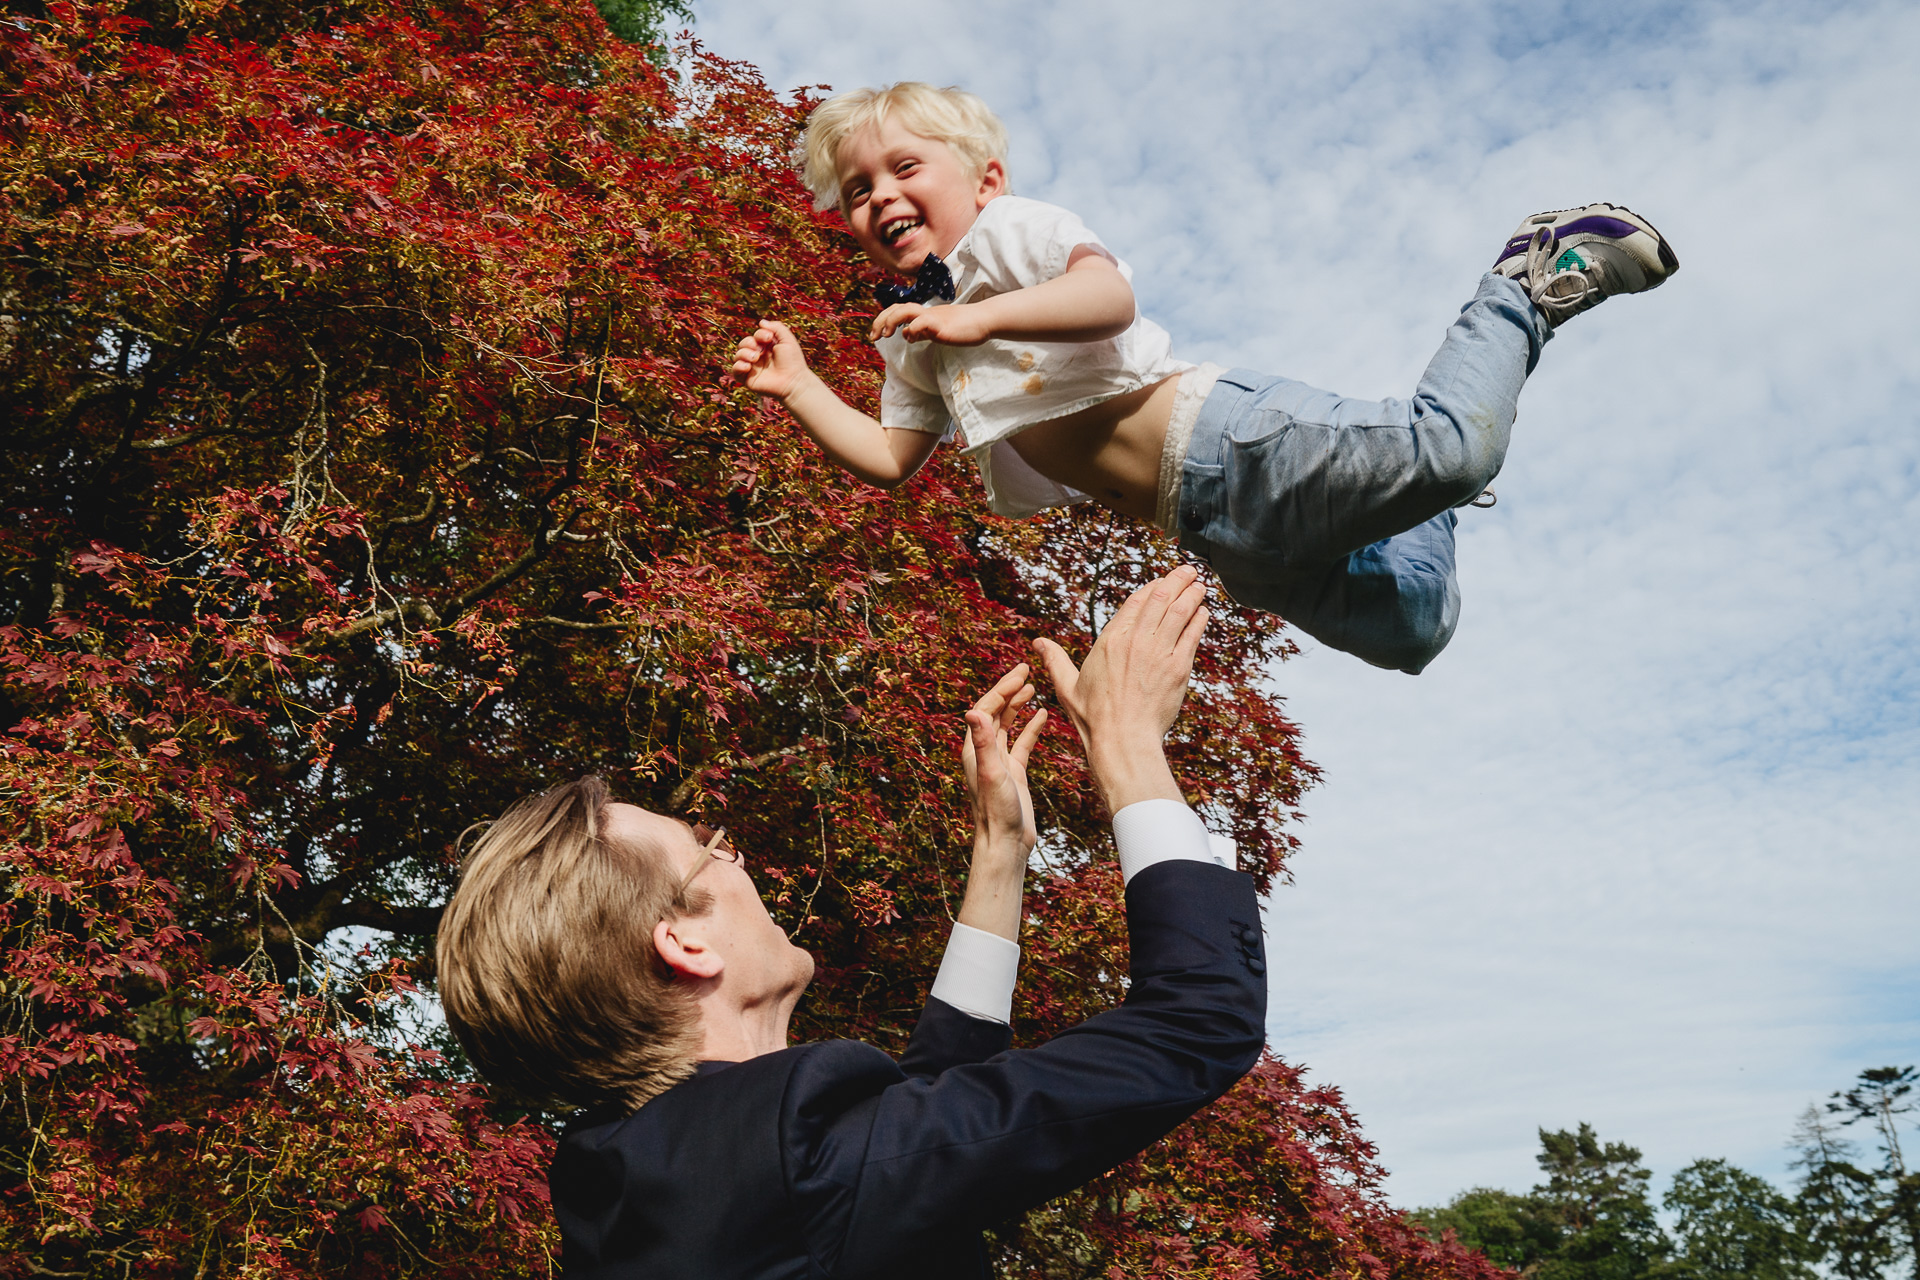 Man throwing a laughing child up in the air